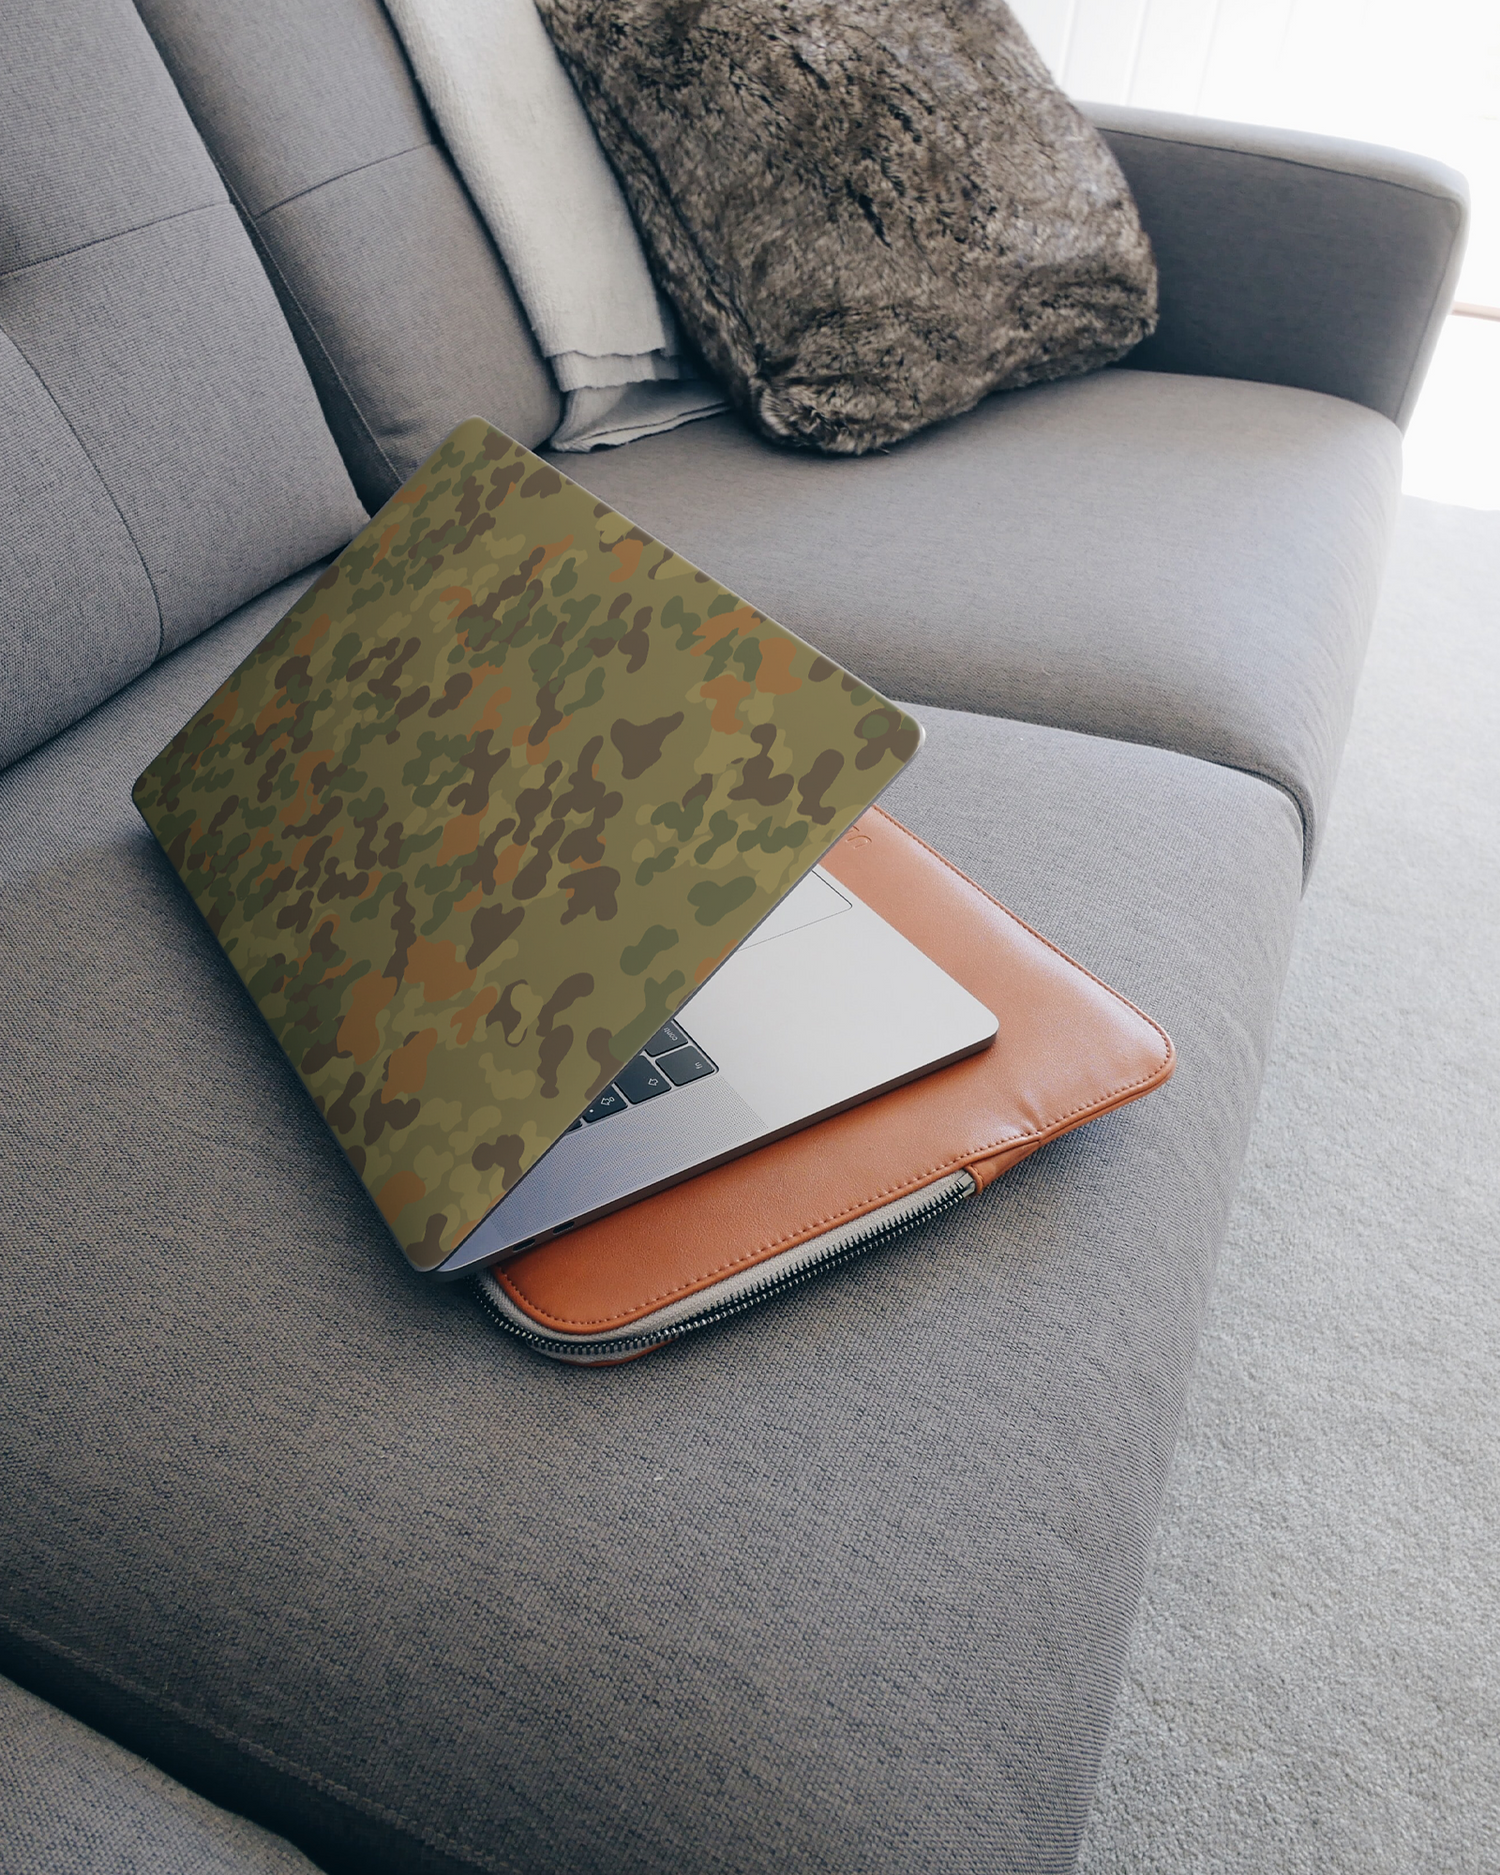 Spot Camo Laptop Skin for 15 inch Apple MacBooks on a couch